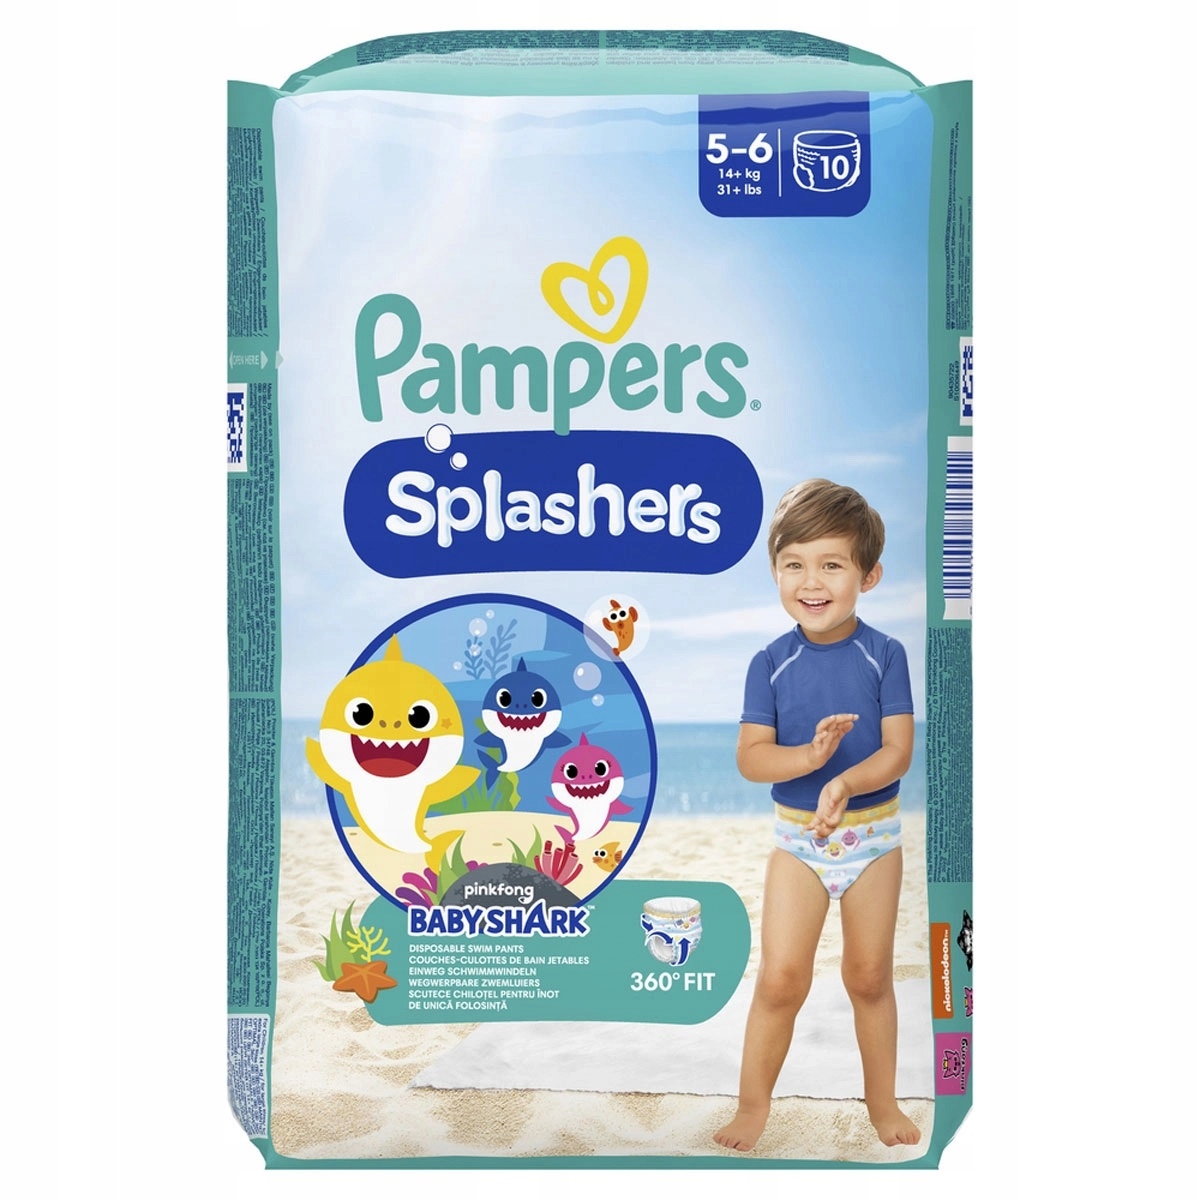 pampers huggies little swimmers